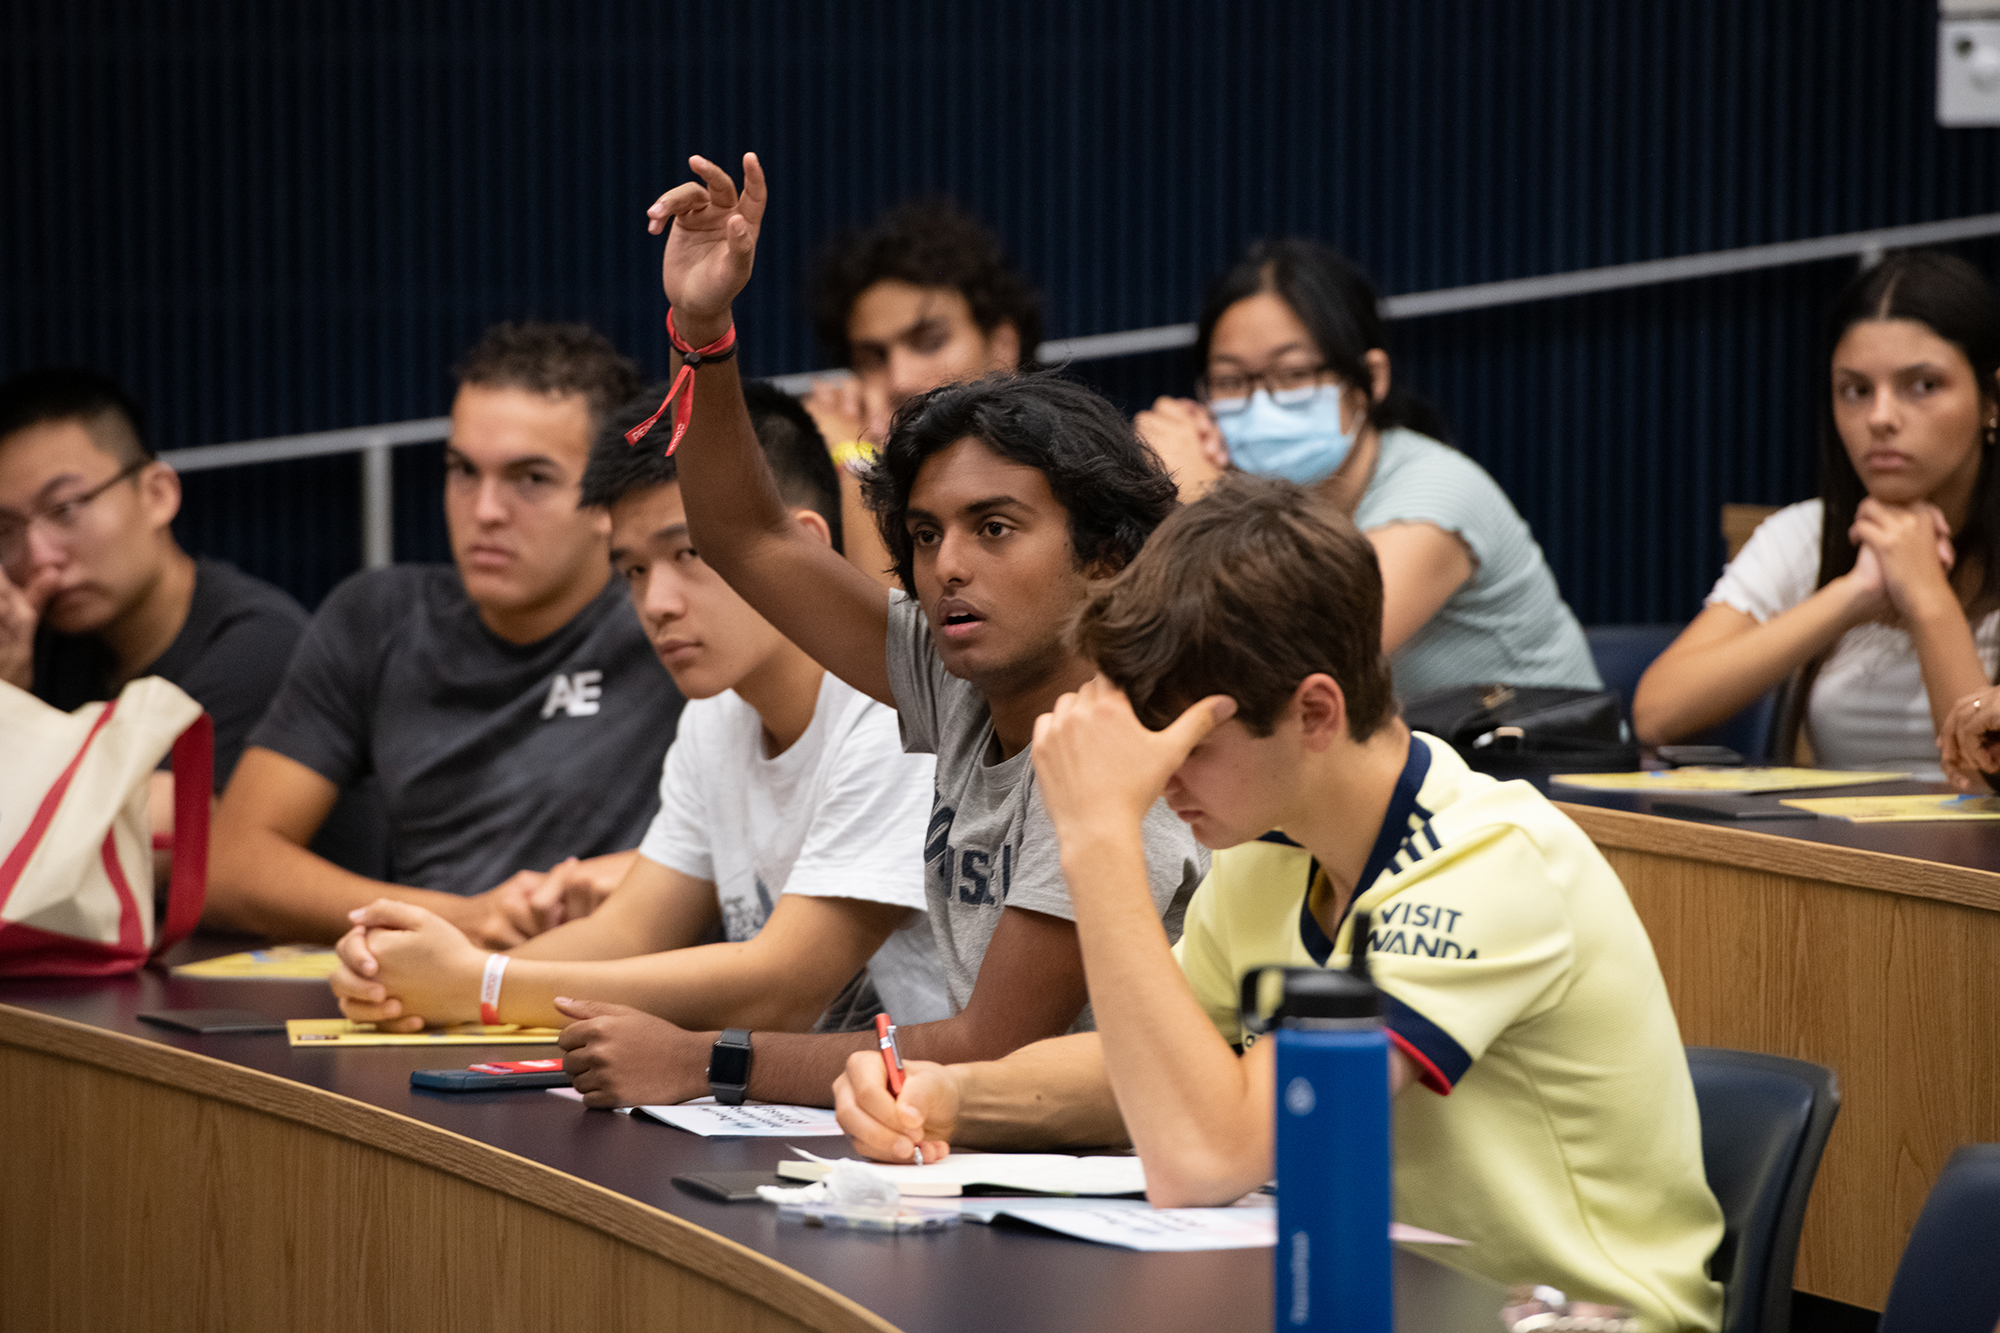 An audience member raises their hand in a lecture hall.